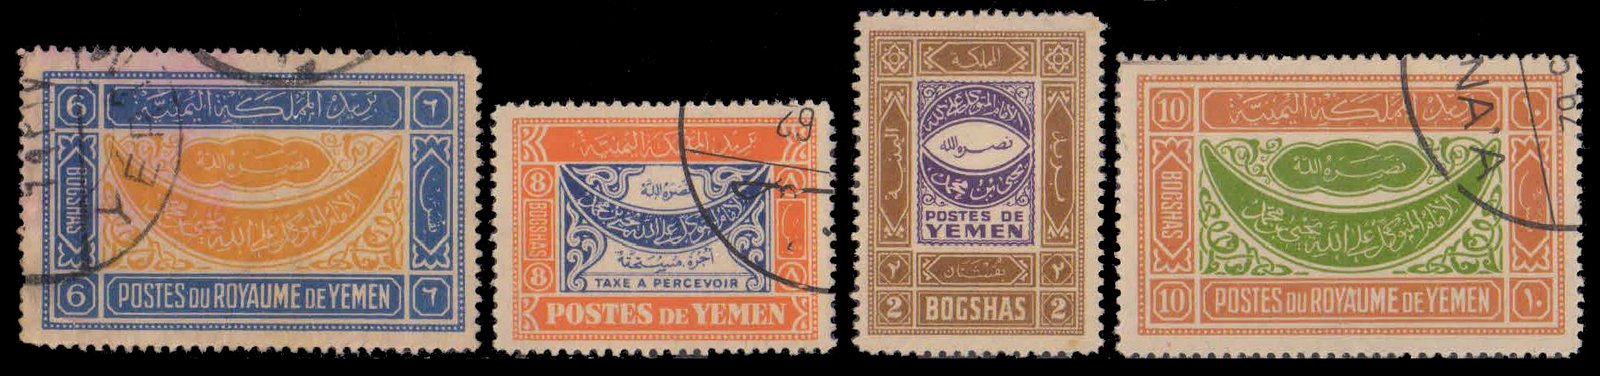 YEMEN 1940-Arabic Inscriptions, Old Postage Stamps-4 Different Stamps, Mint & Used, S.G. 30, 34, 36 & 45